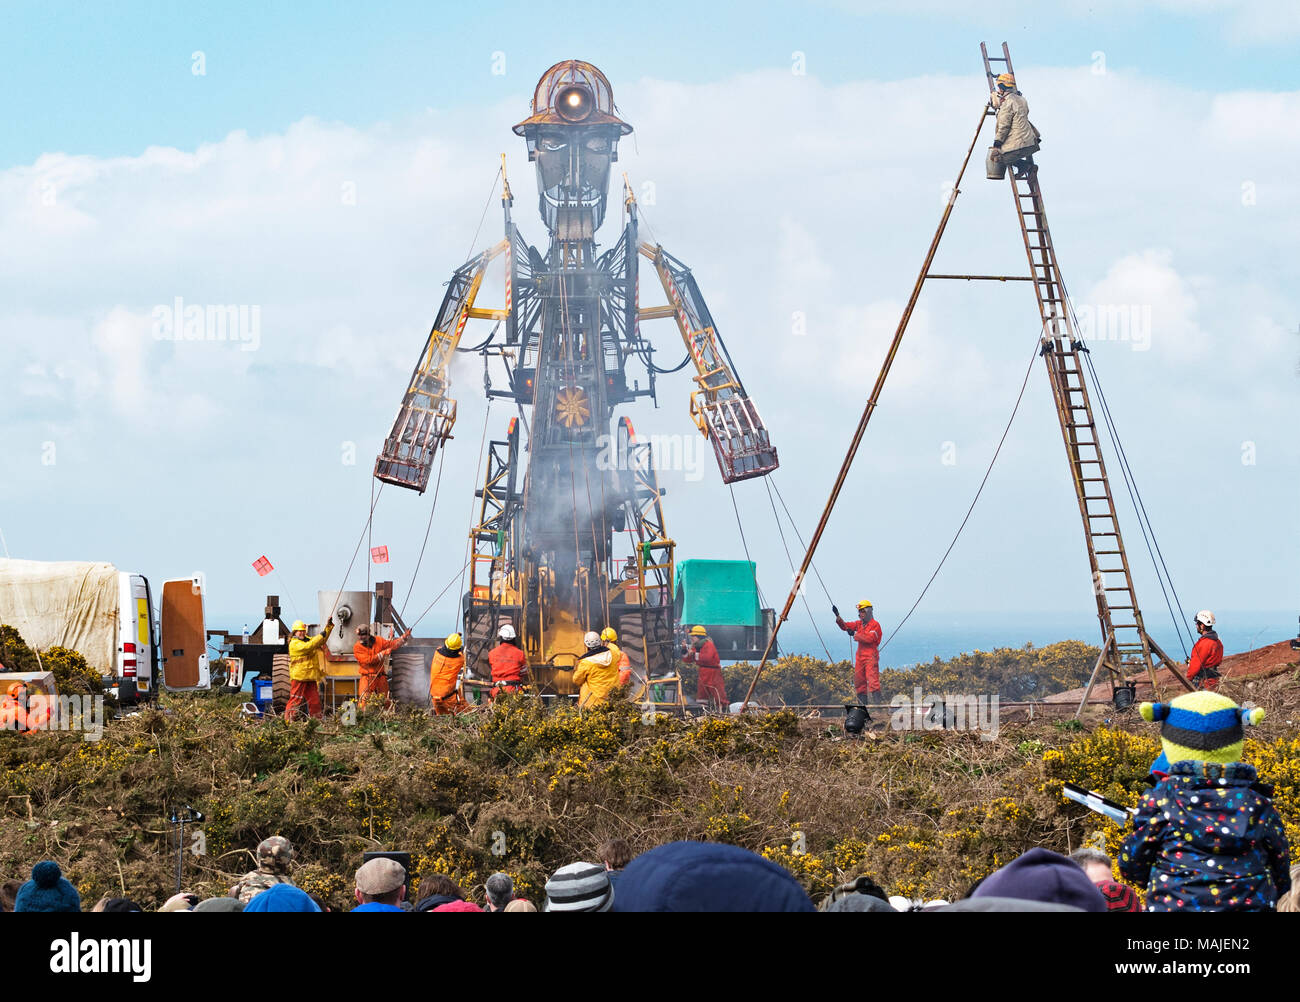 The Man engine a mechanical puppet made in cornwall, england, uk, to celebrate 10 years of world heritage status for the tin mining in cornwall. Stock Photo